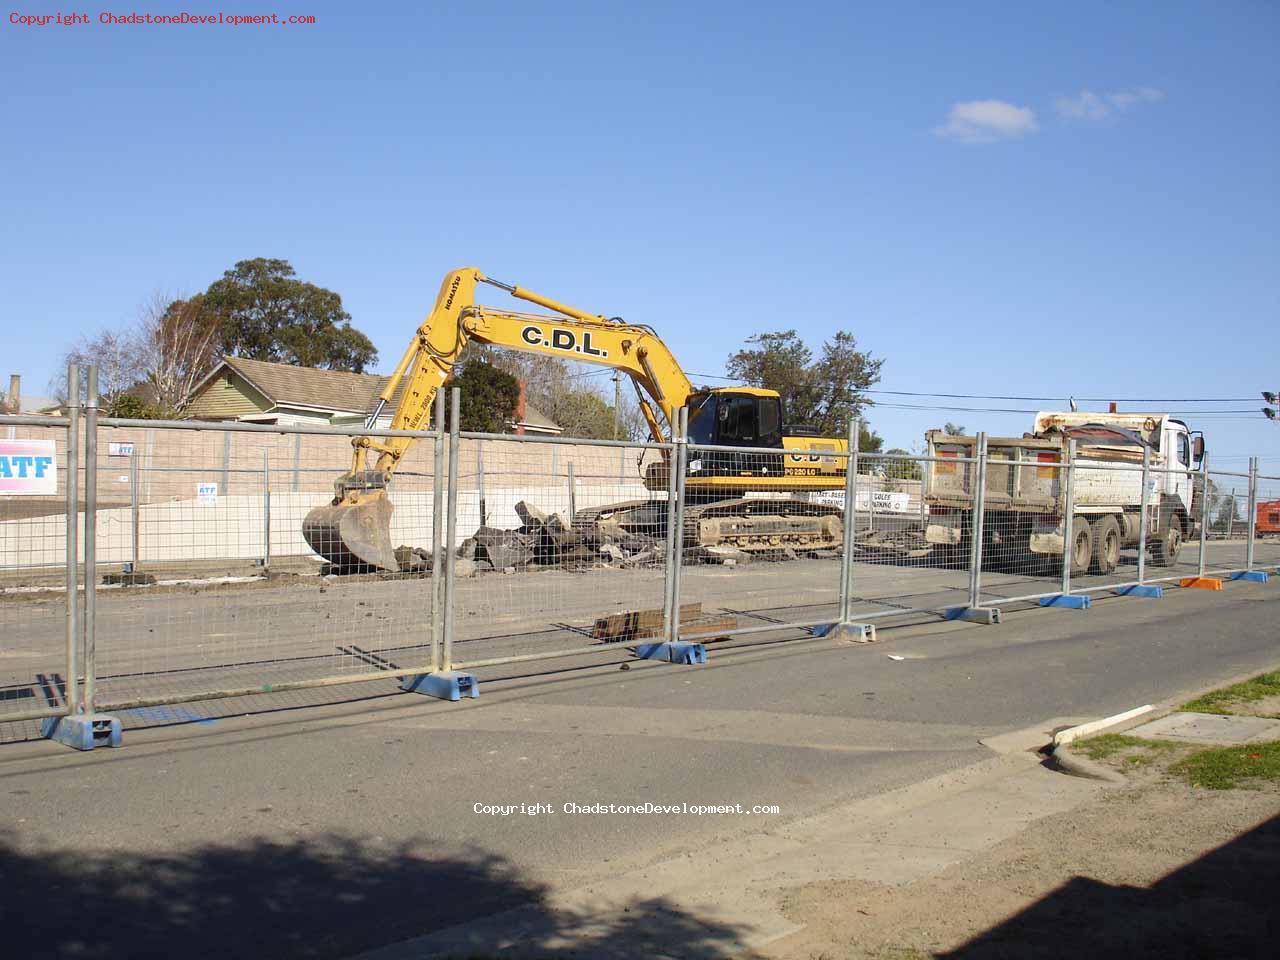 Digging up bitumen into haulage truck - Chadstone Development Discussions